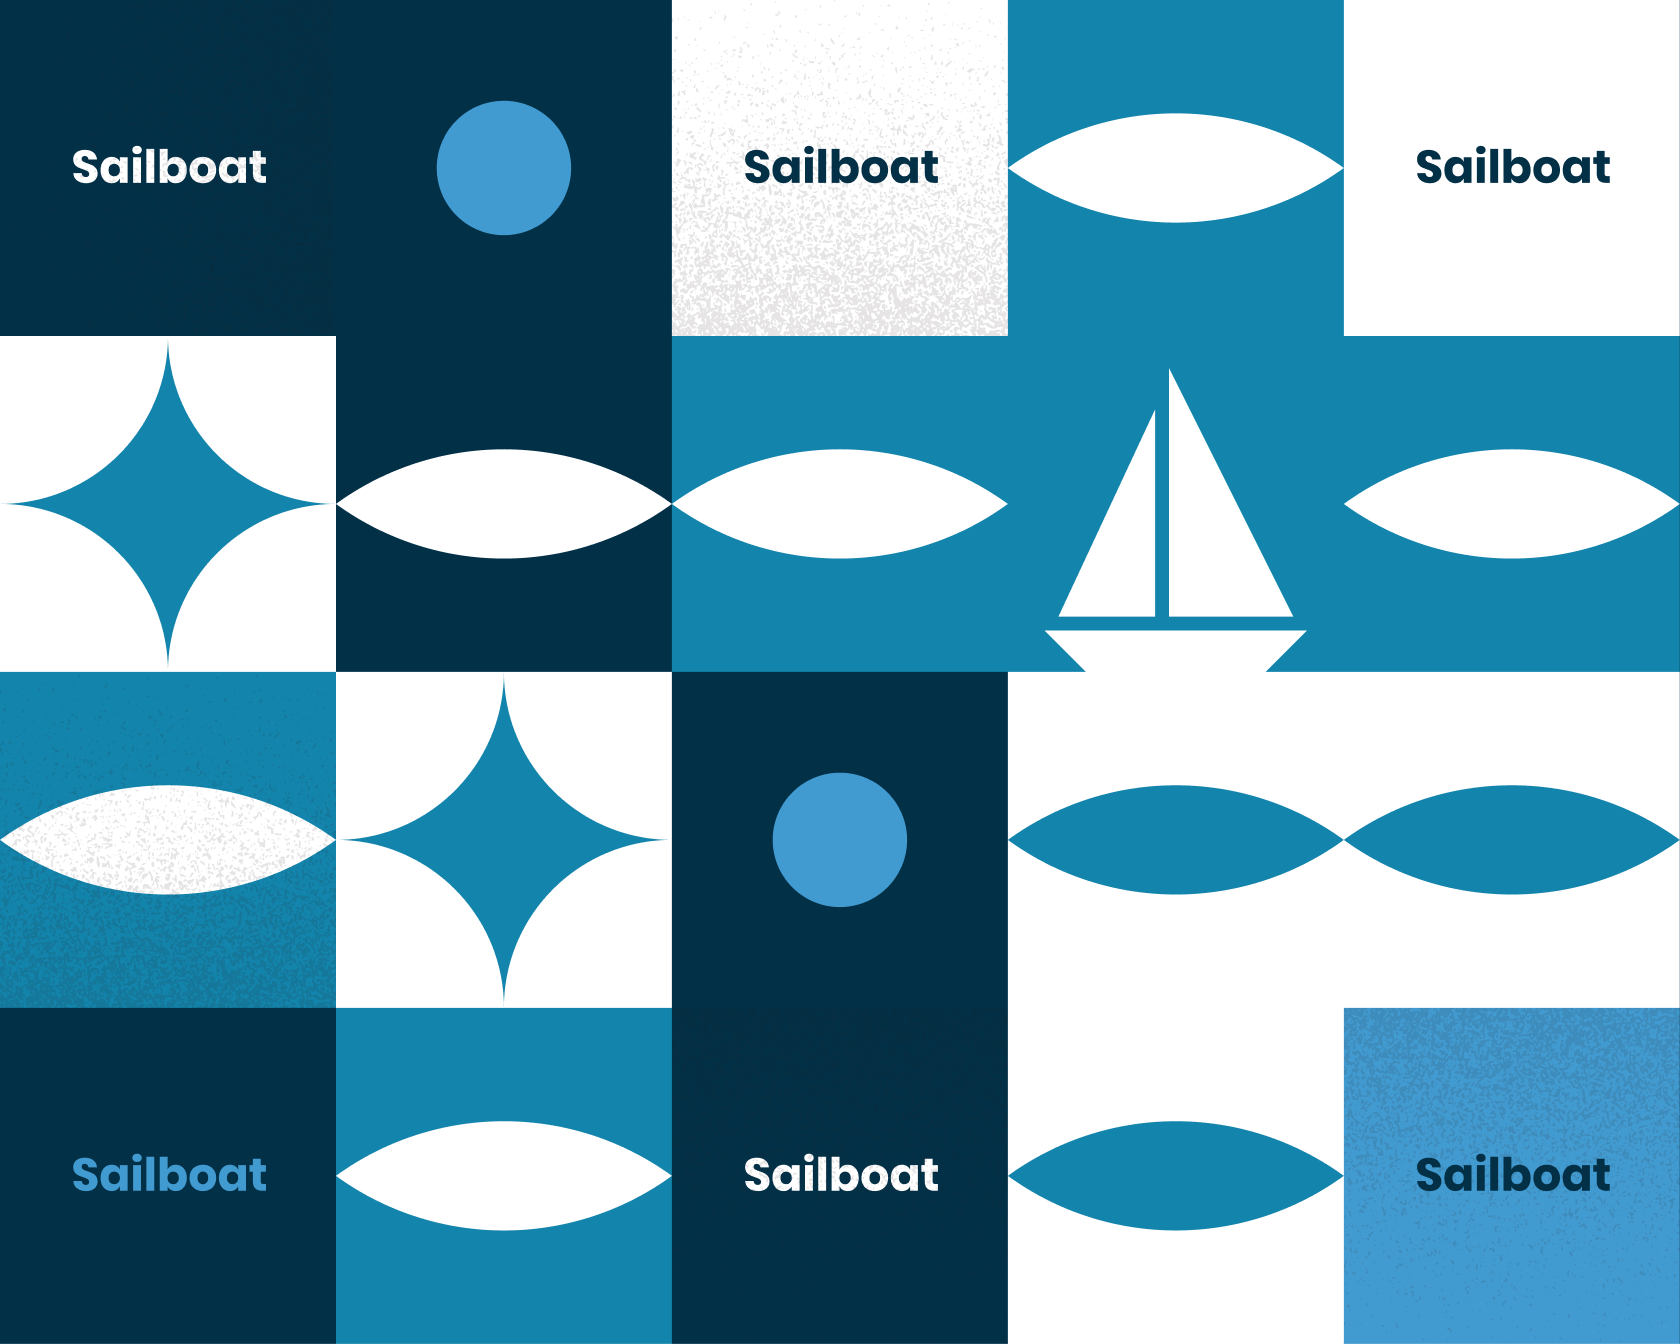 The Sailboat retrospective is one of the most useful templates, write free notes using this board feedback template